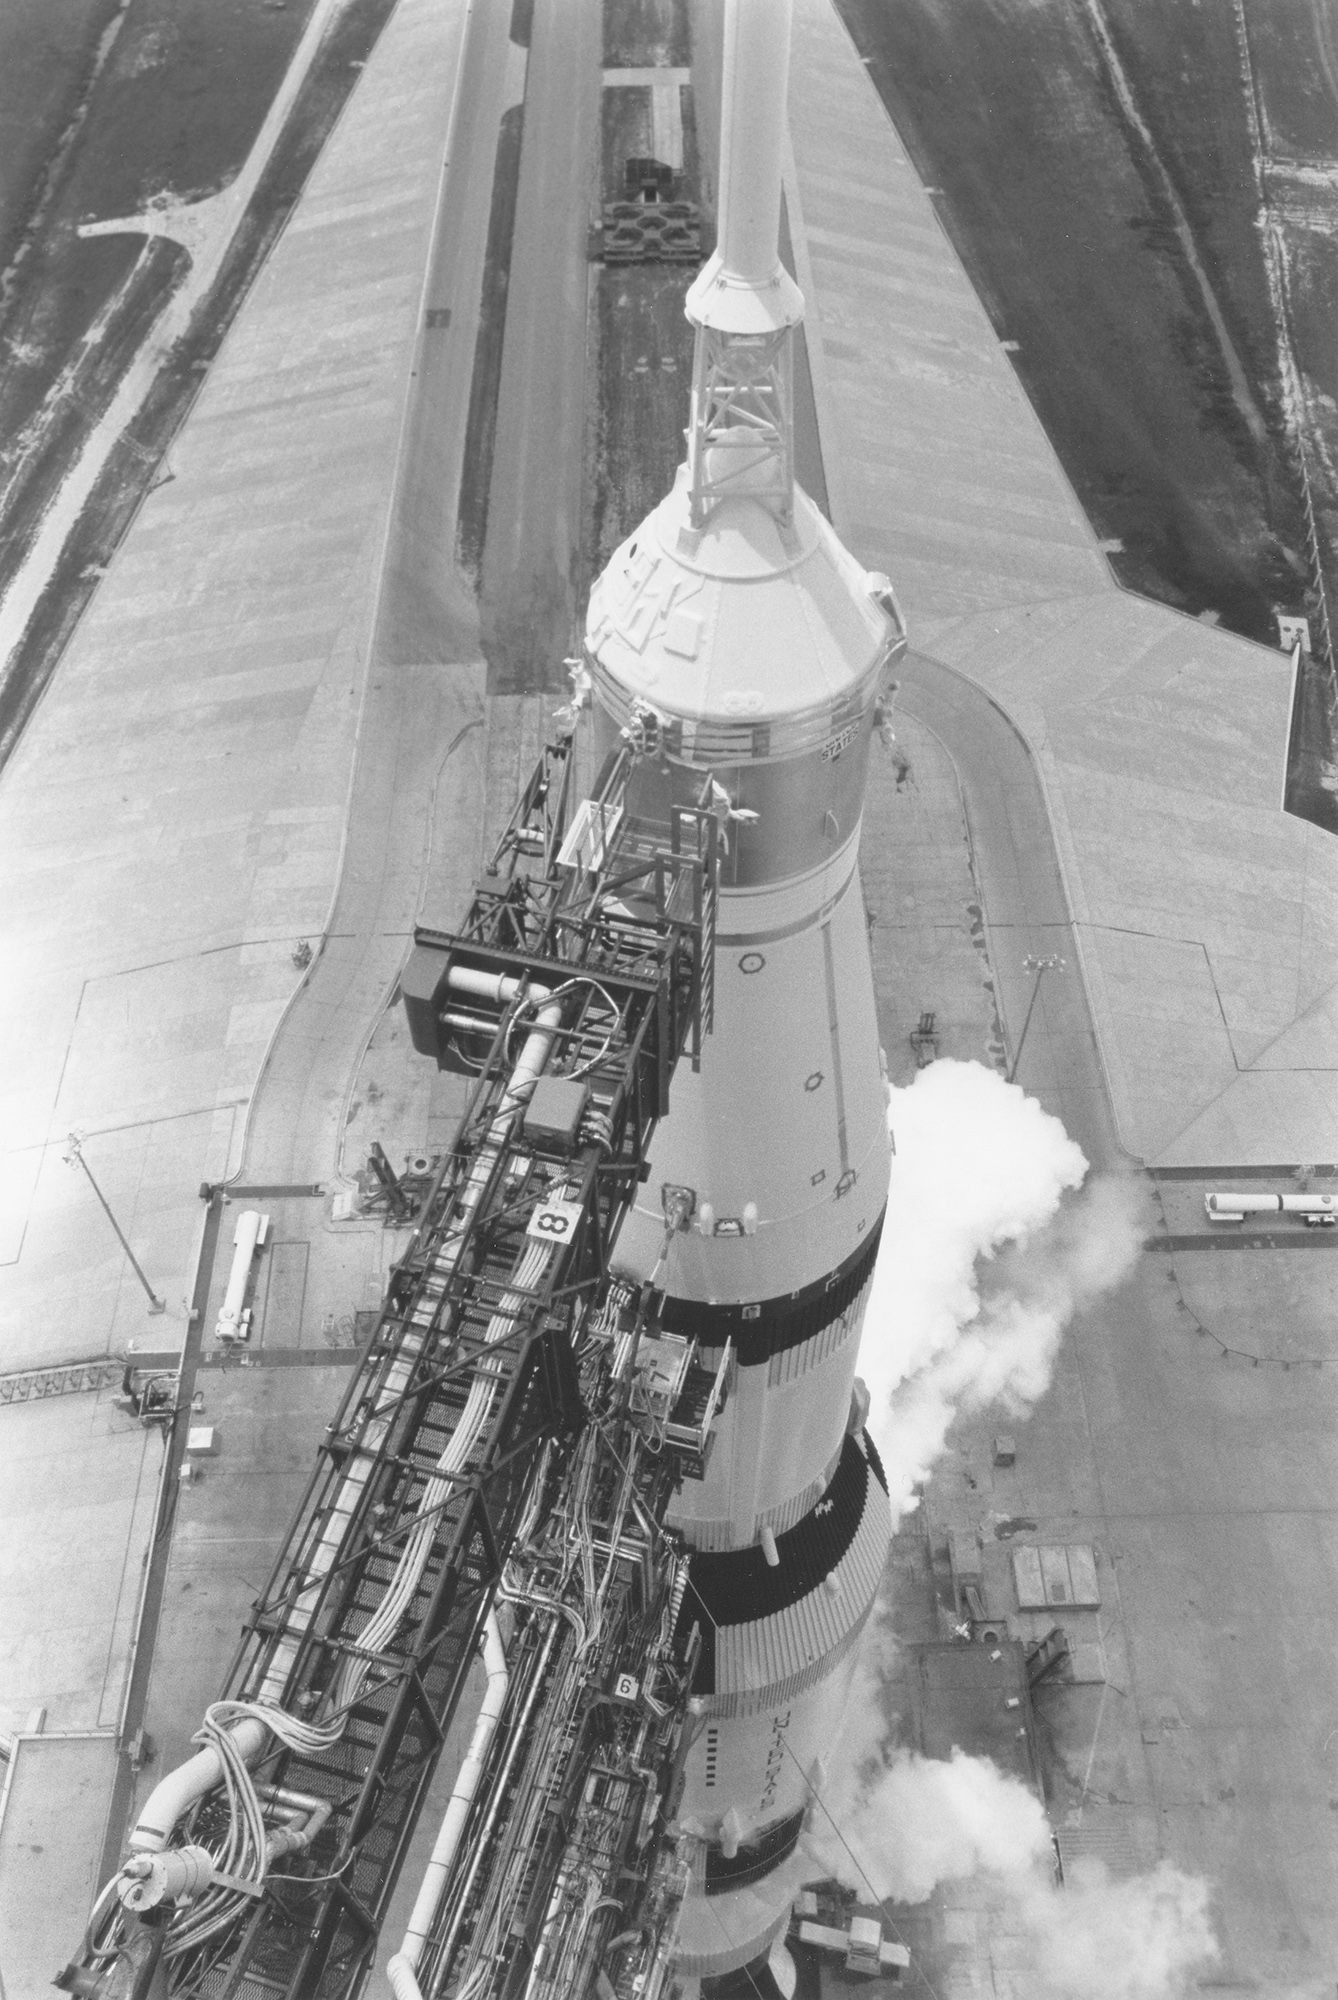 apollo-11-saturn-v-during-countdown-demonstration-test-fueling-exercise.jpg